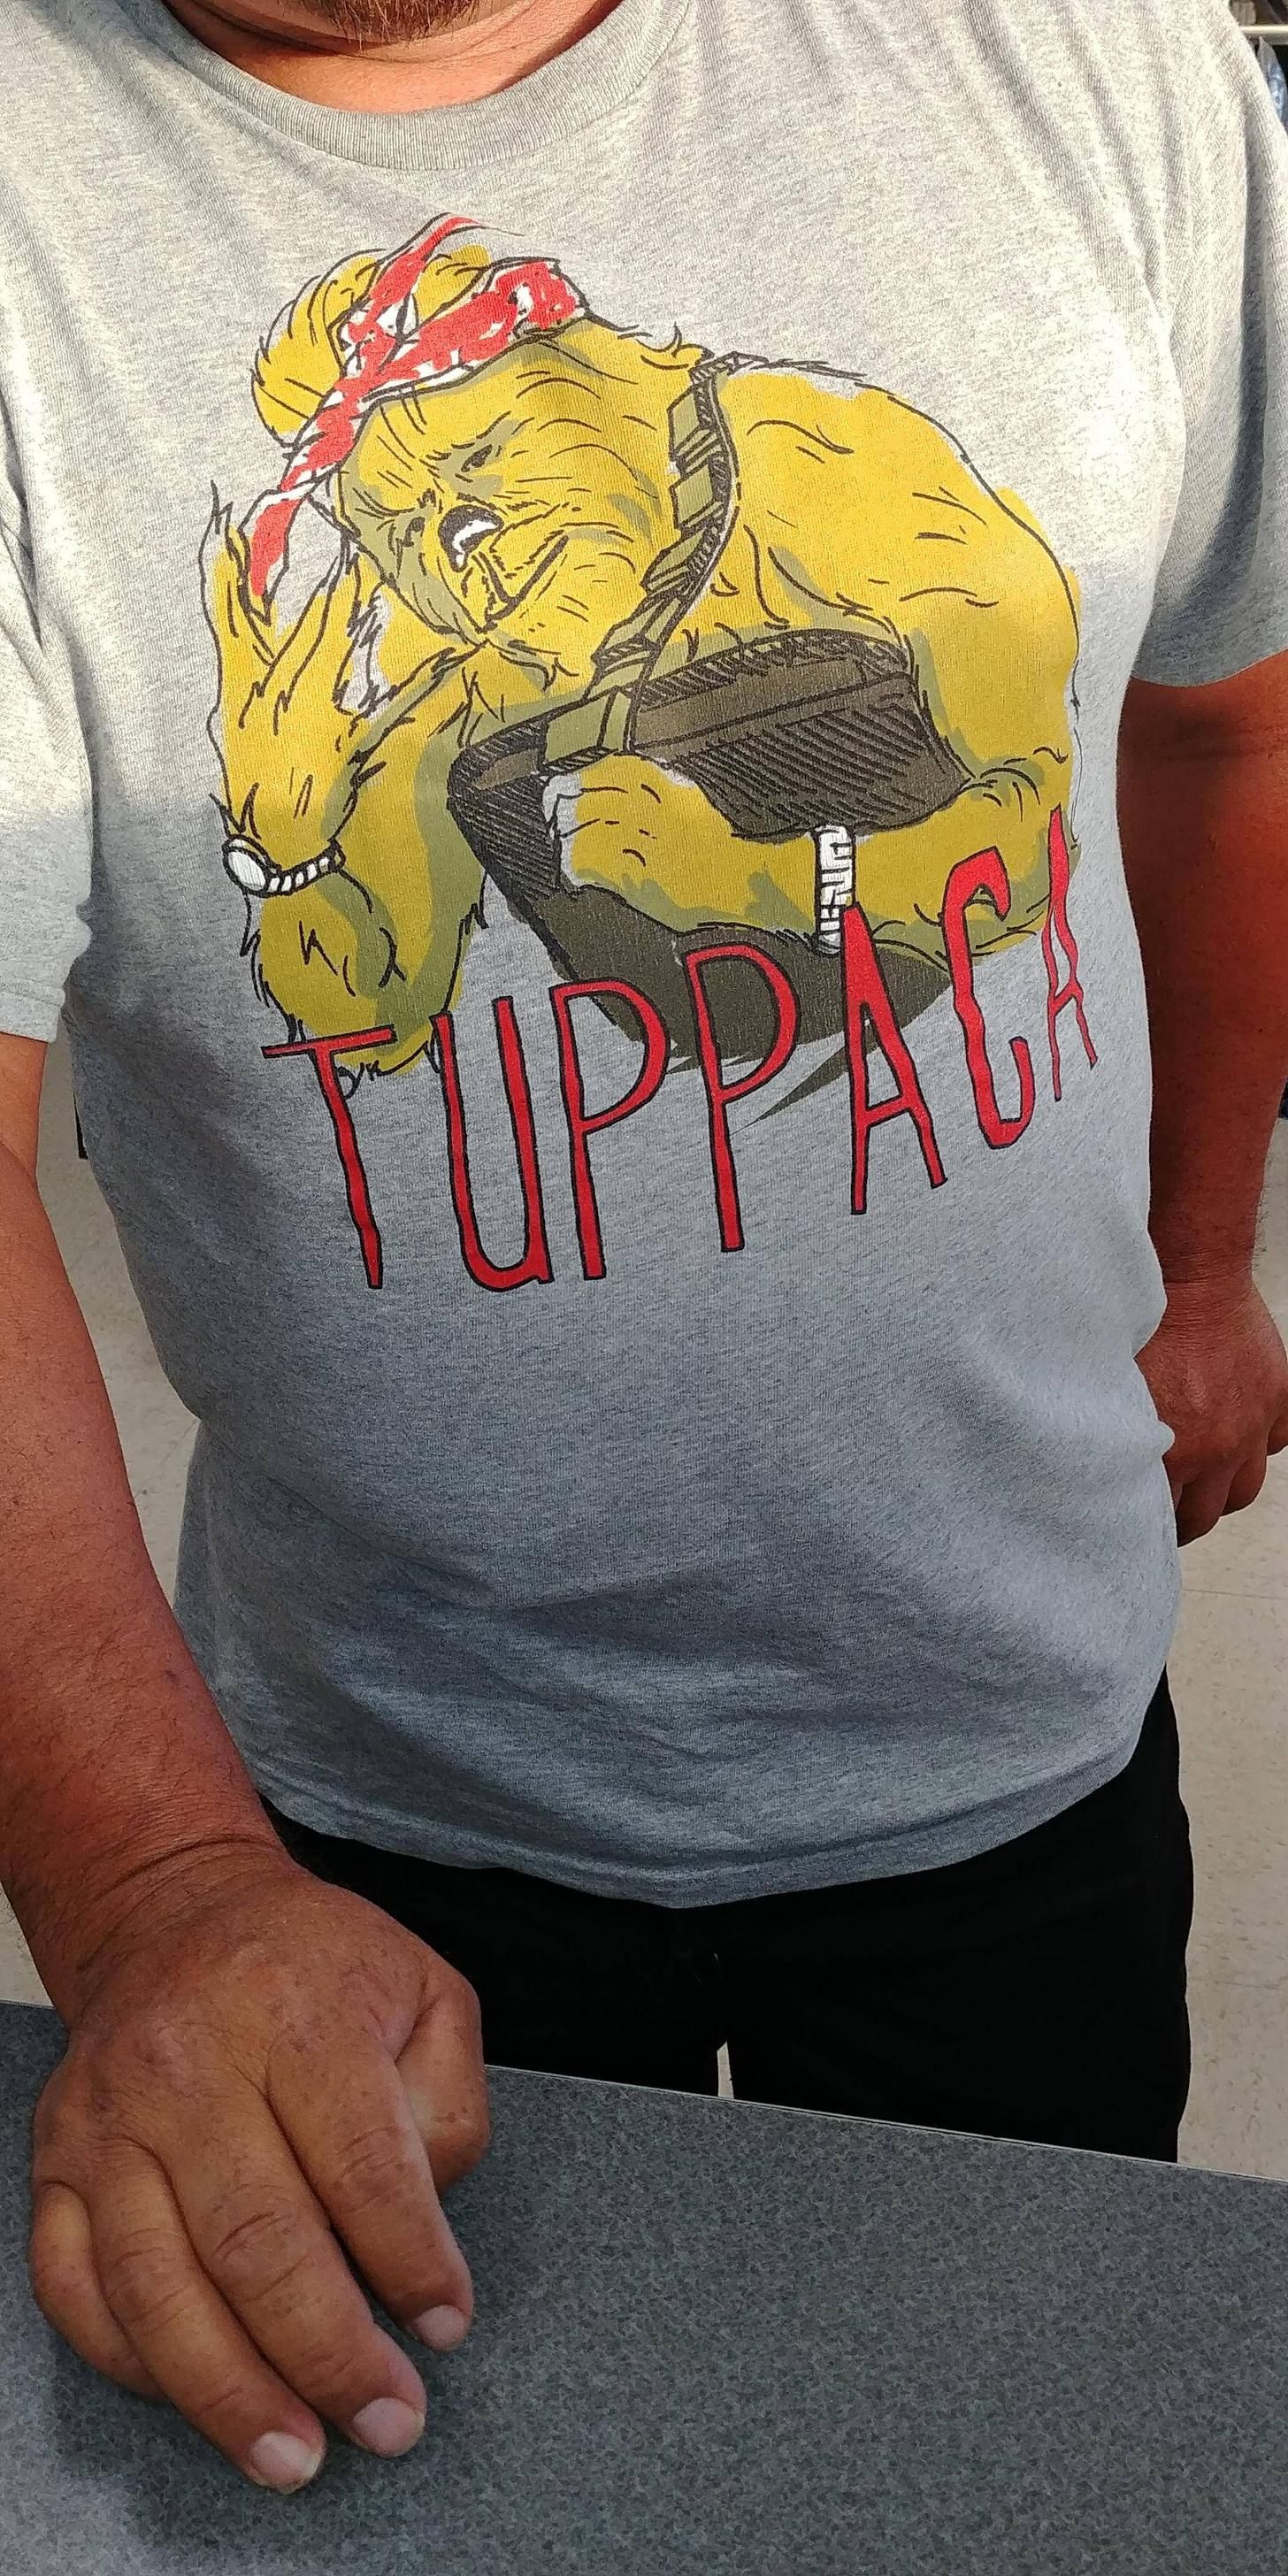 Customer came into my part time job wearing this badass shirt!